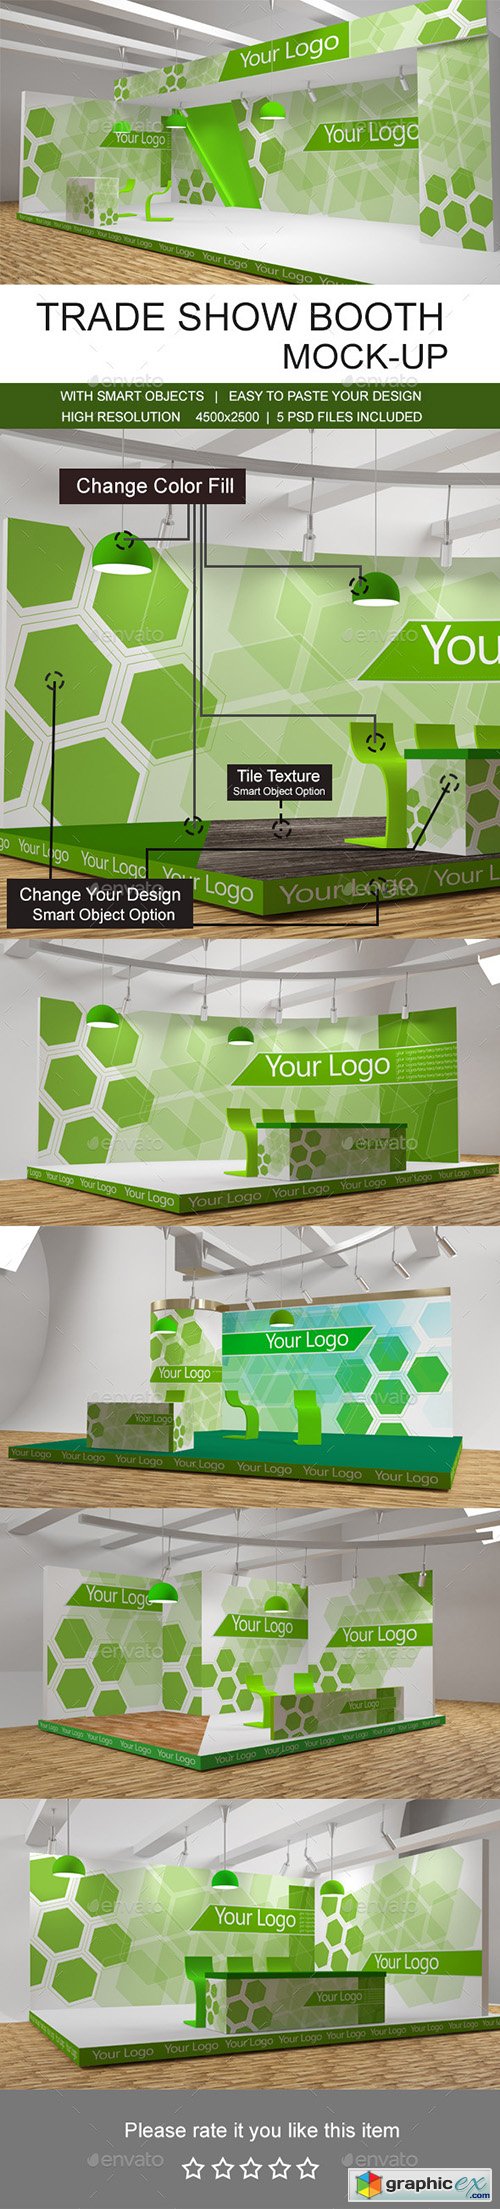 Trade Show Booth Mockups